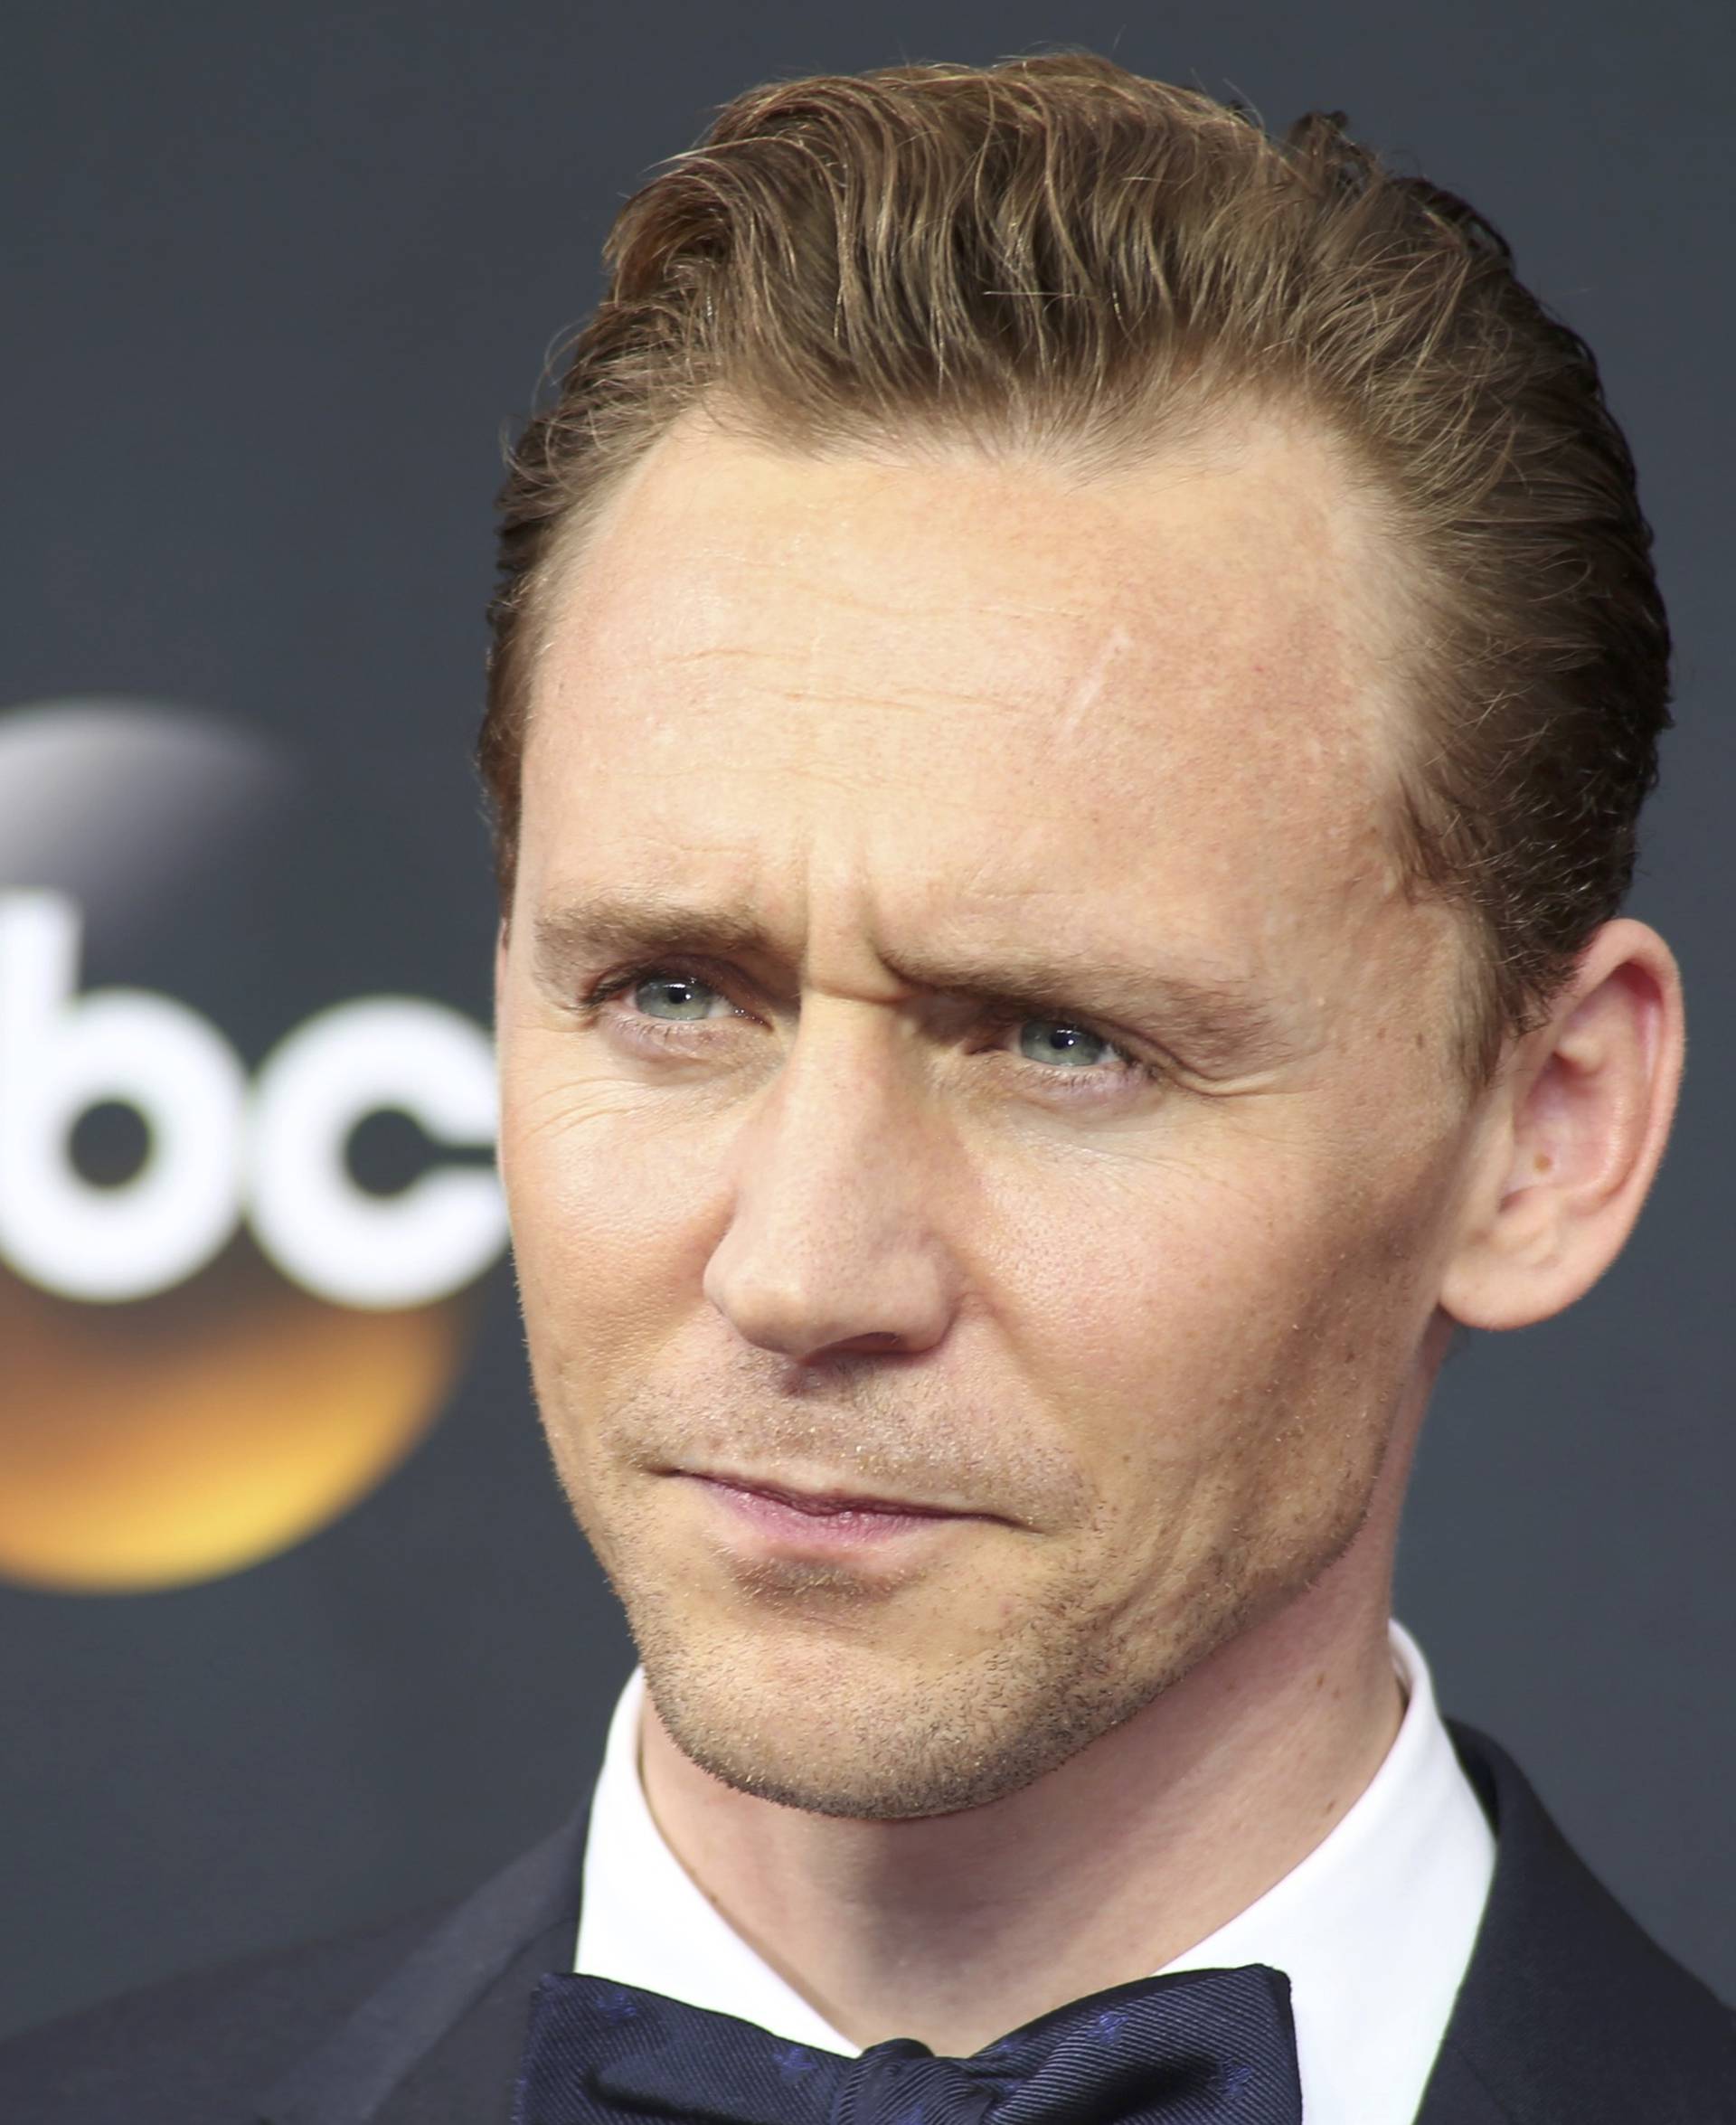 Actor Tom Hiddleston arrives at the 68th Primetime Emmy Awards in Los Angeles, California